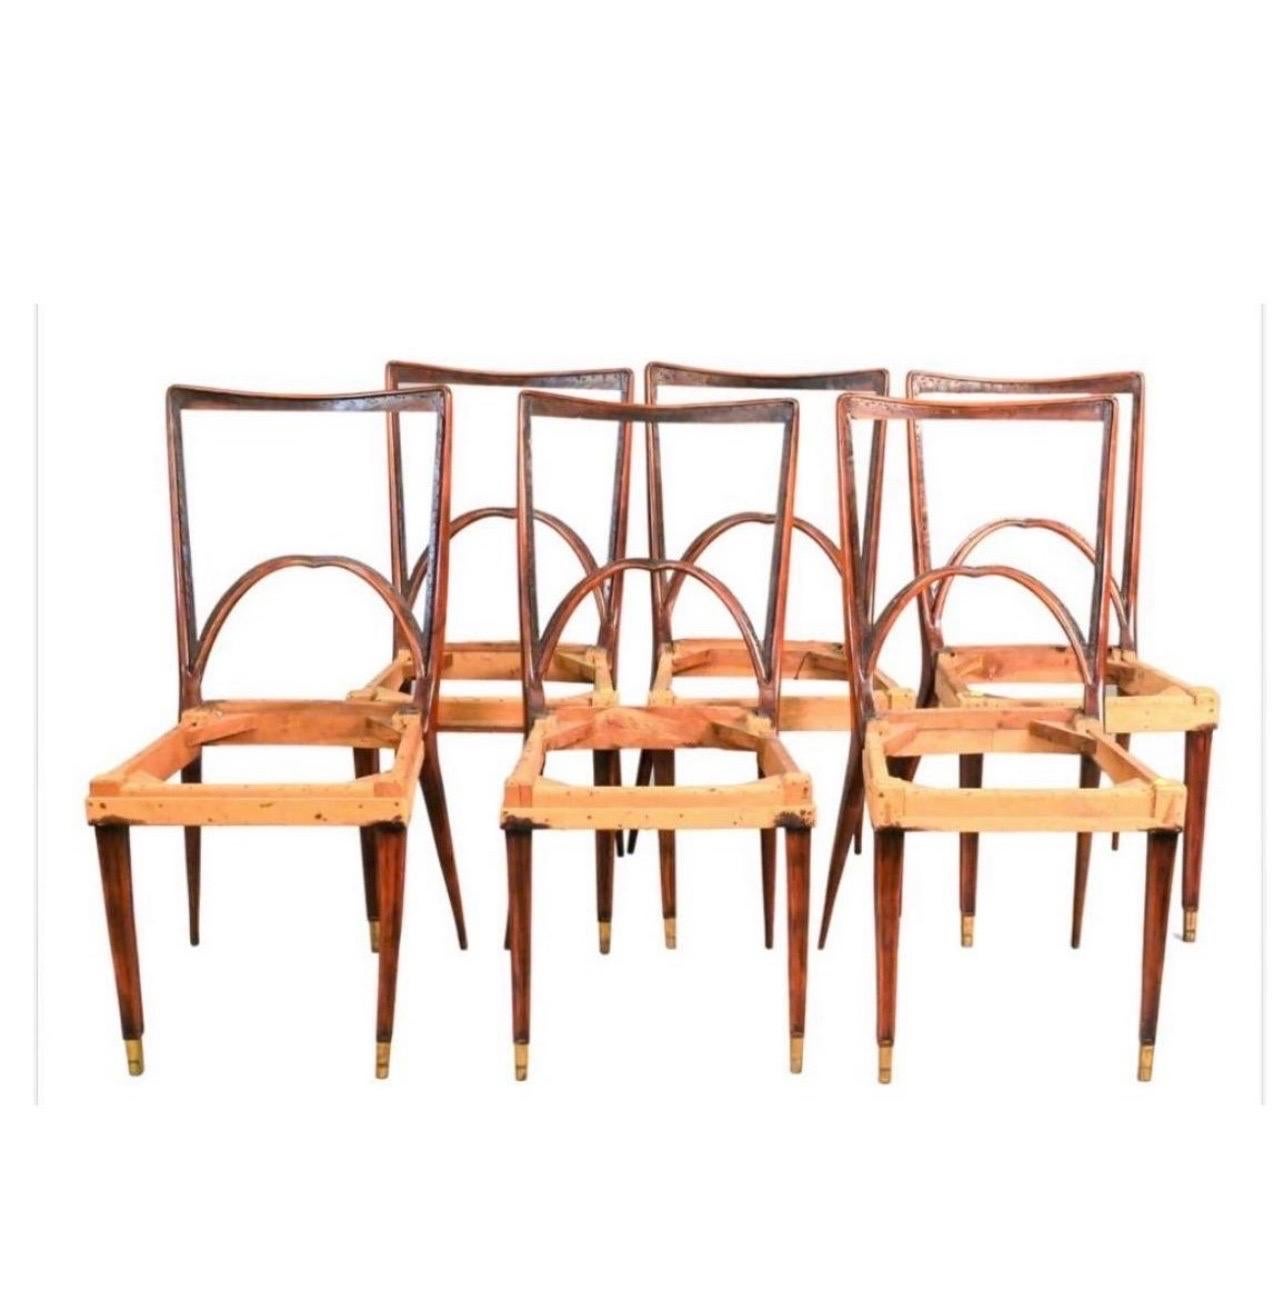 Stunning mid century Italian dining chairs featuring a graceful rosewood frame and brass tips on feet, see pics. 
Note buyer would need to have seats and backrests upholstered as they are currently bare - again see pics. While these have no makers